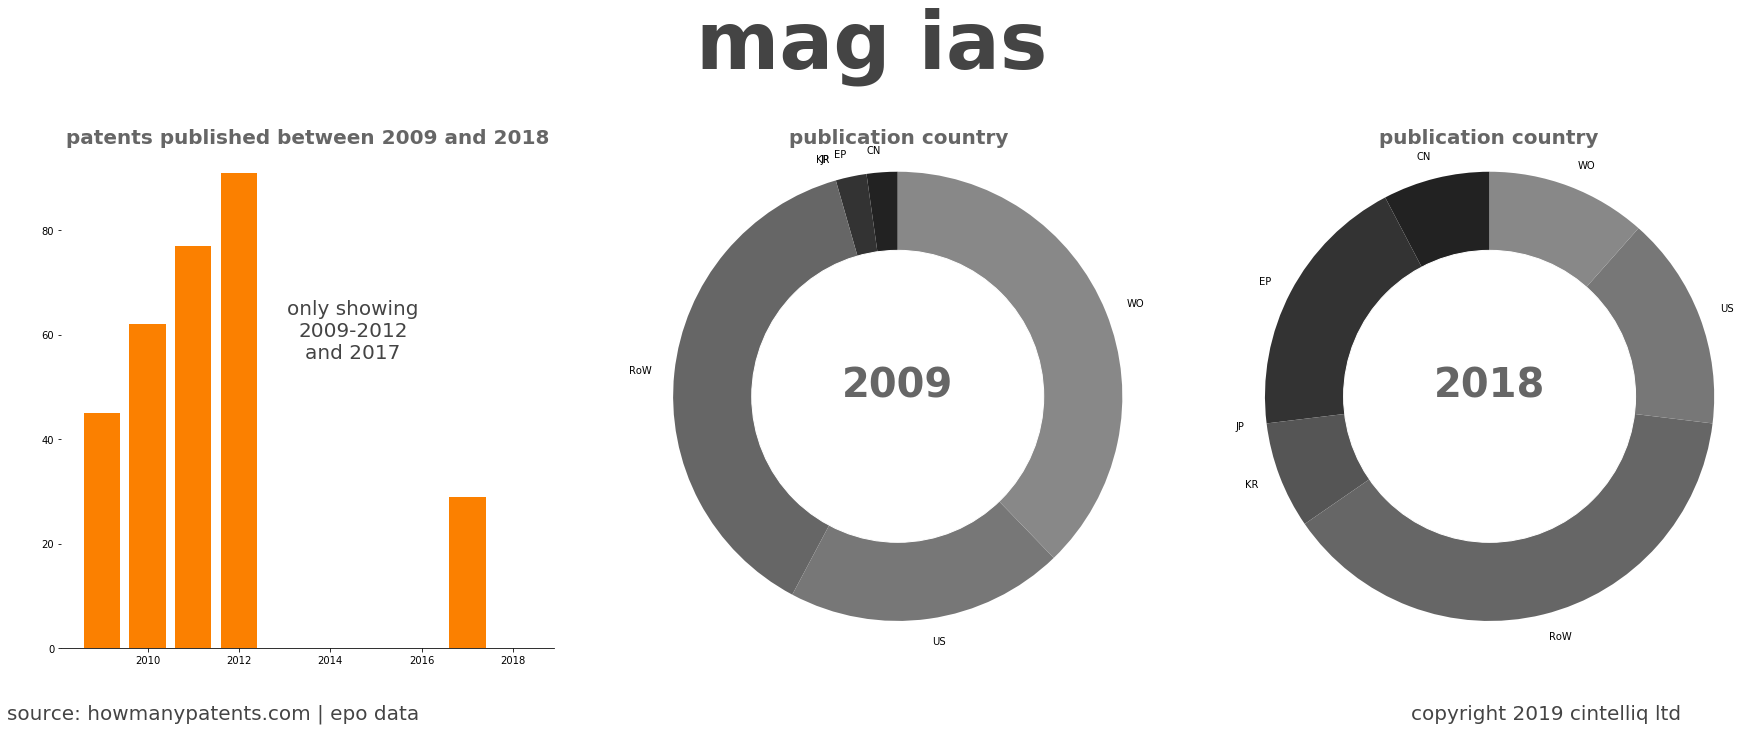 summary of patents for Mag Ias